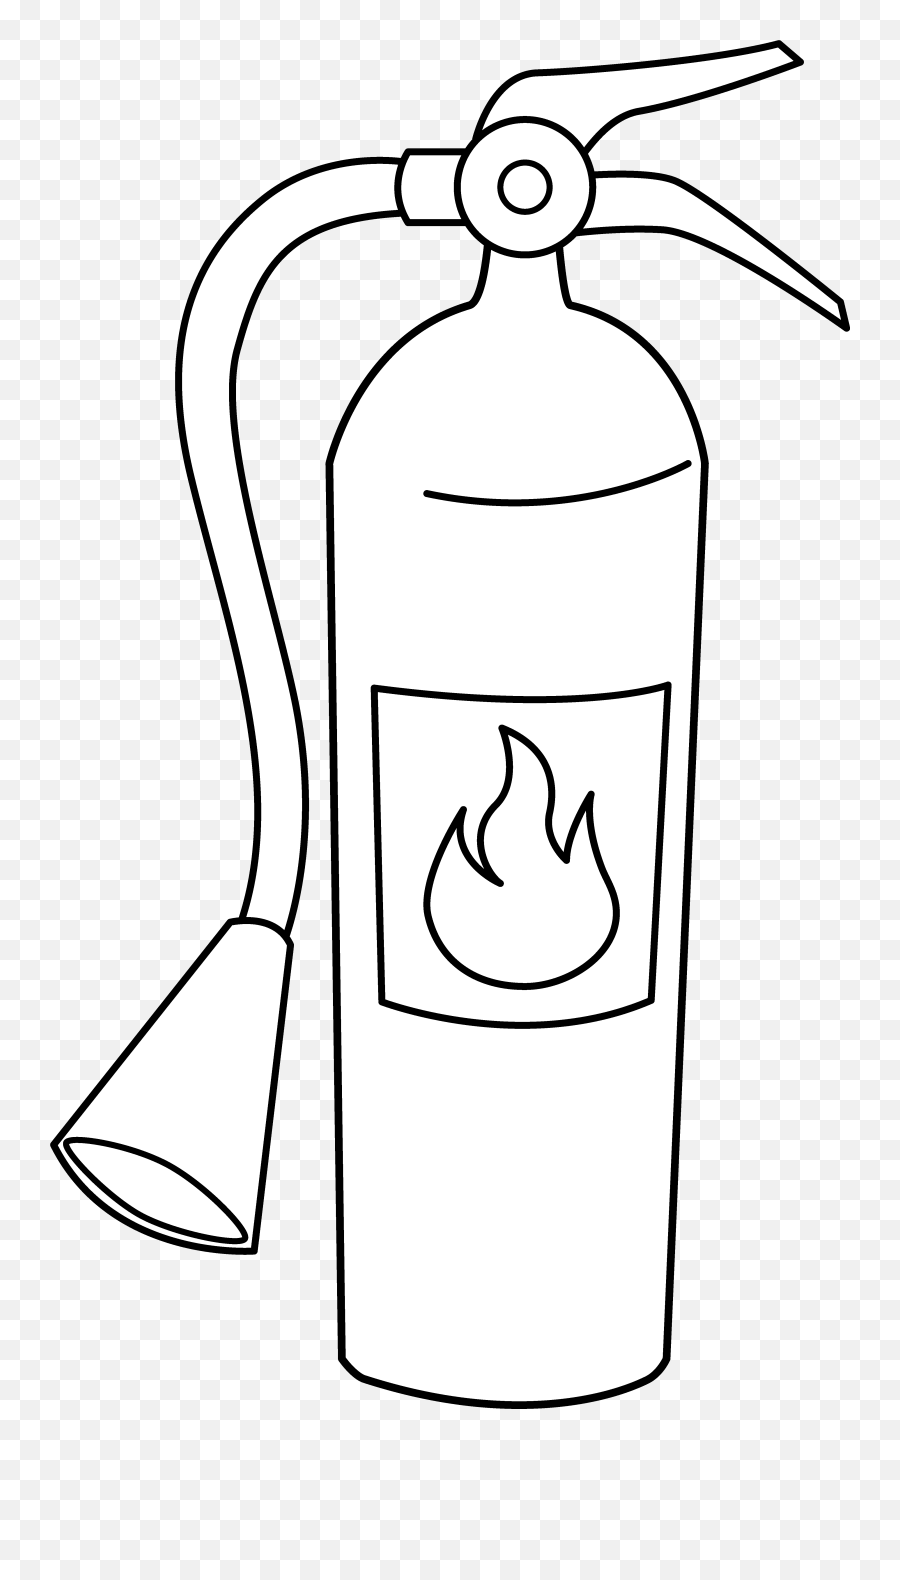 Fire Line Art Download Free Clip Art - Easy To Draw Fire Extinguisher Emoji,How To Draw The Fire Emoji